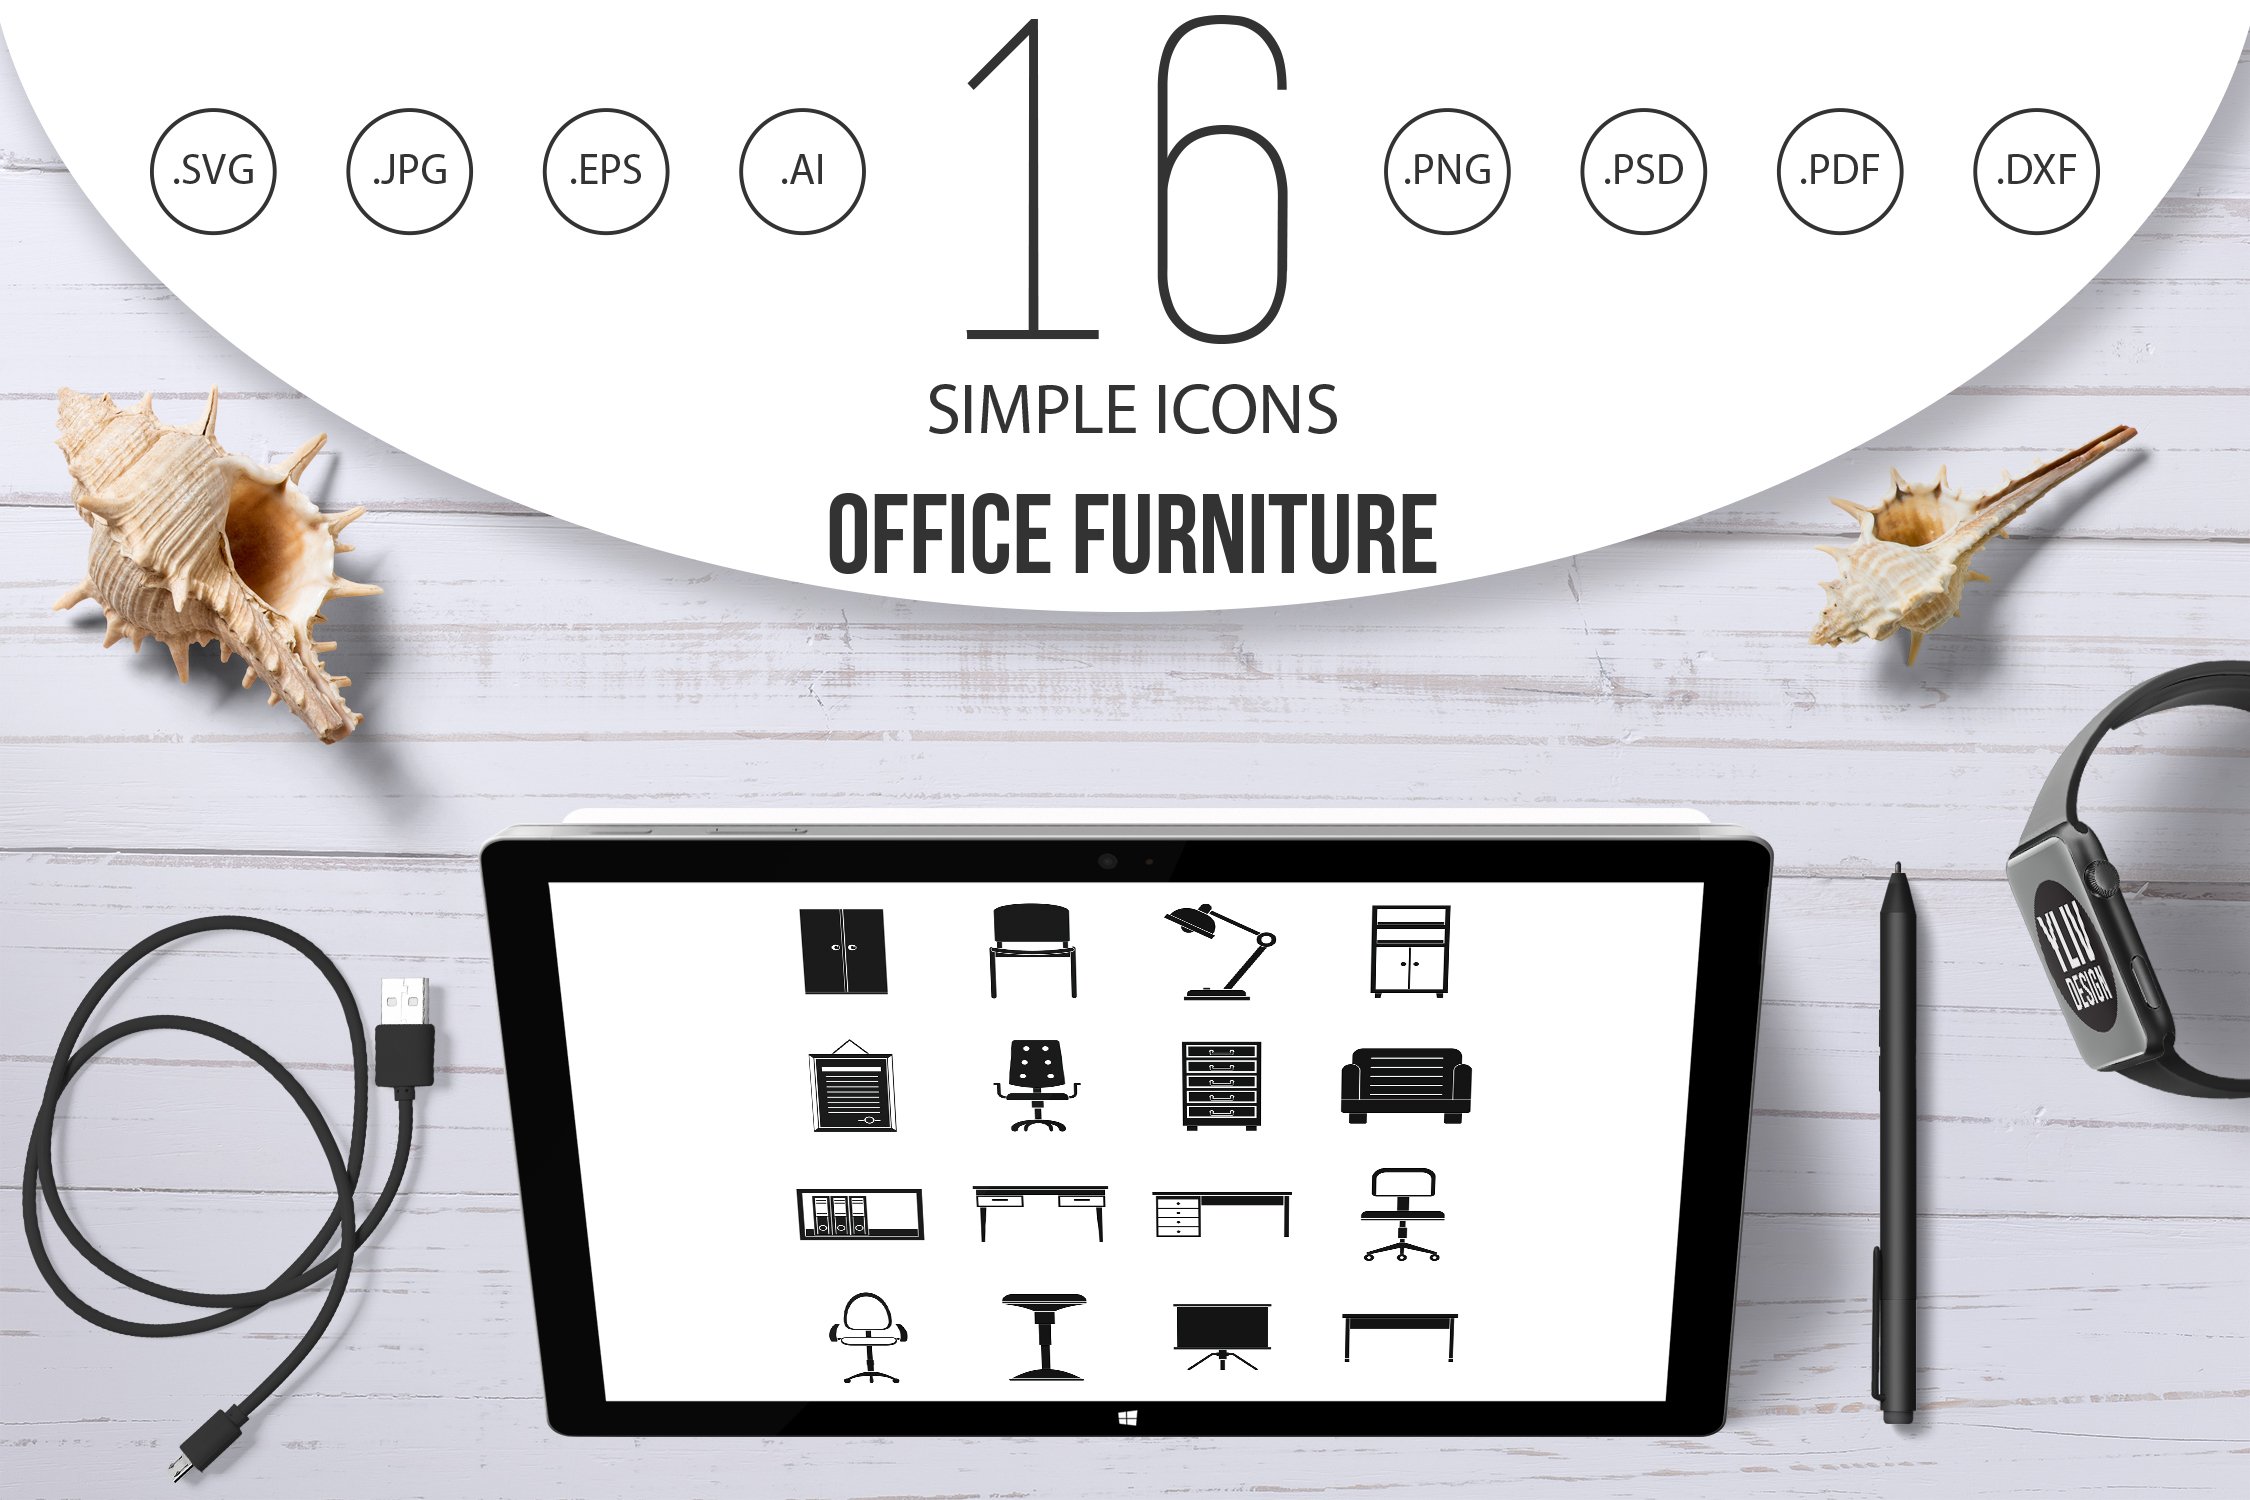 Office furniture icons set, simple cover image.